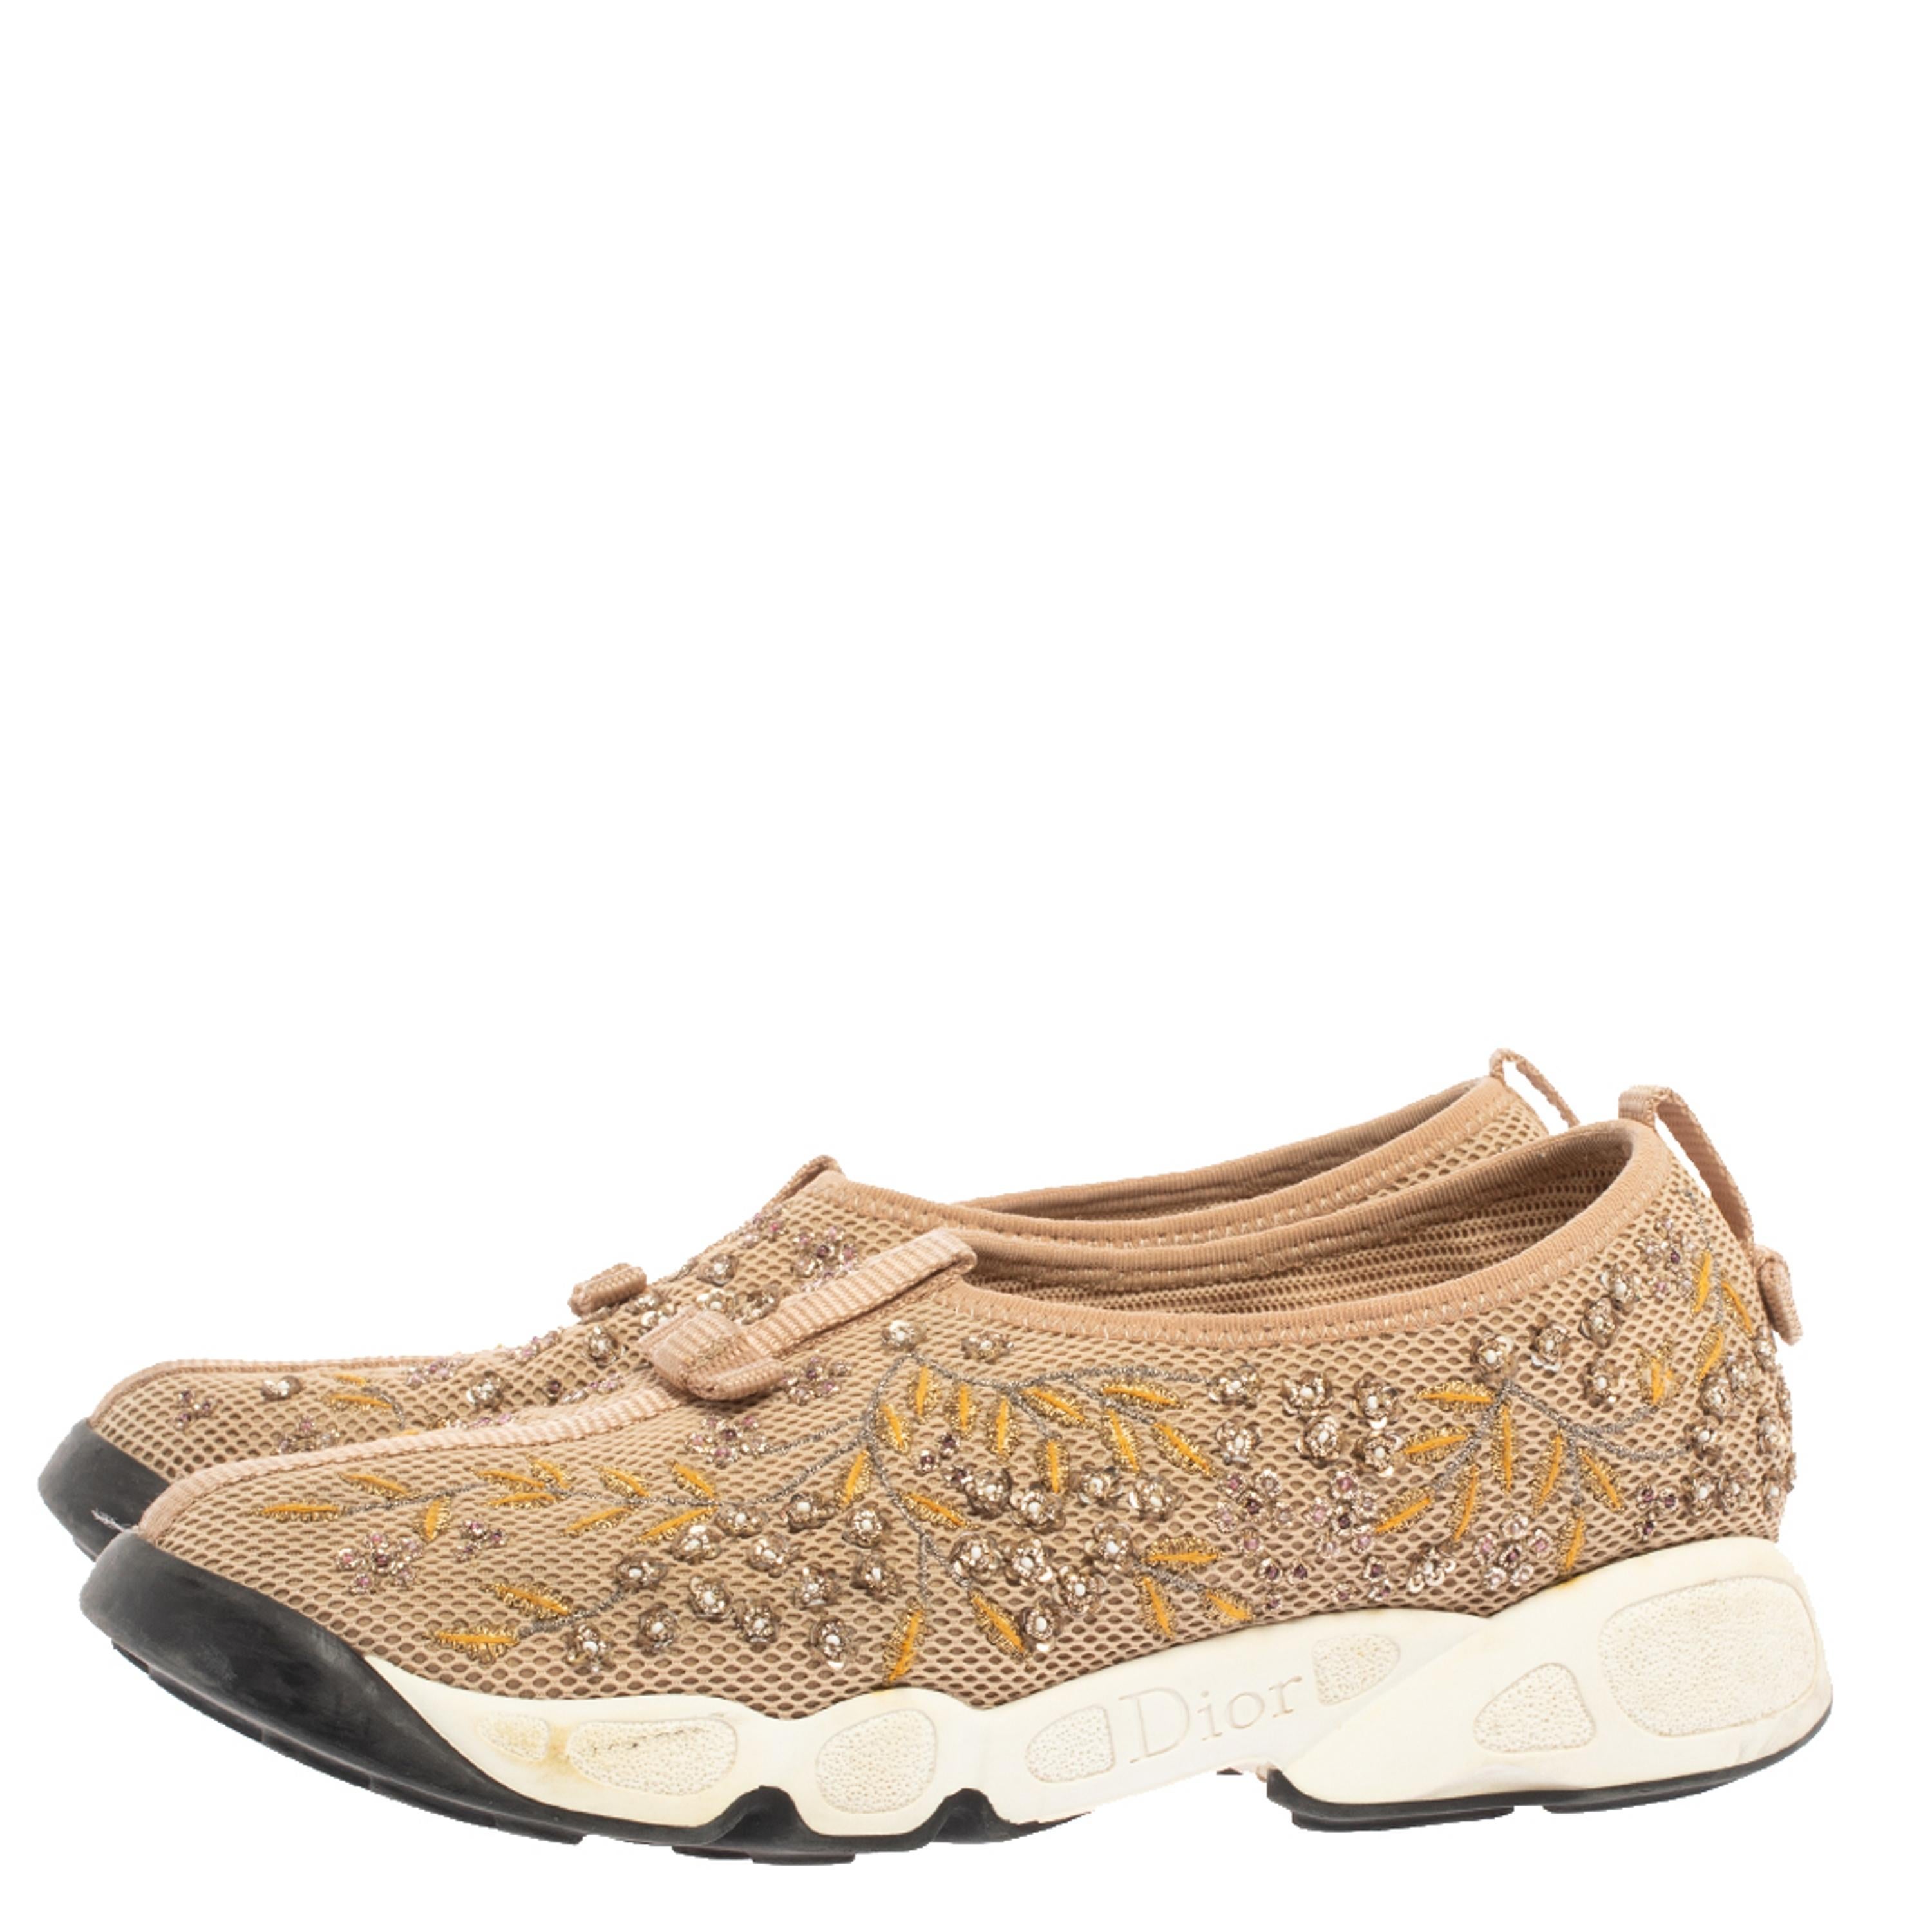 Dior Beige Mesh Fusion Floral Embellished And Embroidered Sneakers Size 38.5 In Good Condition In Dubai, Al Qouz 2